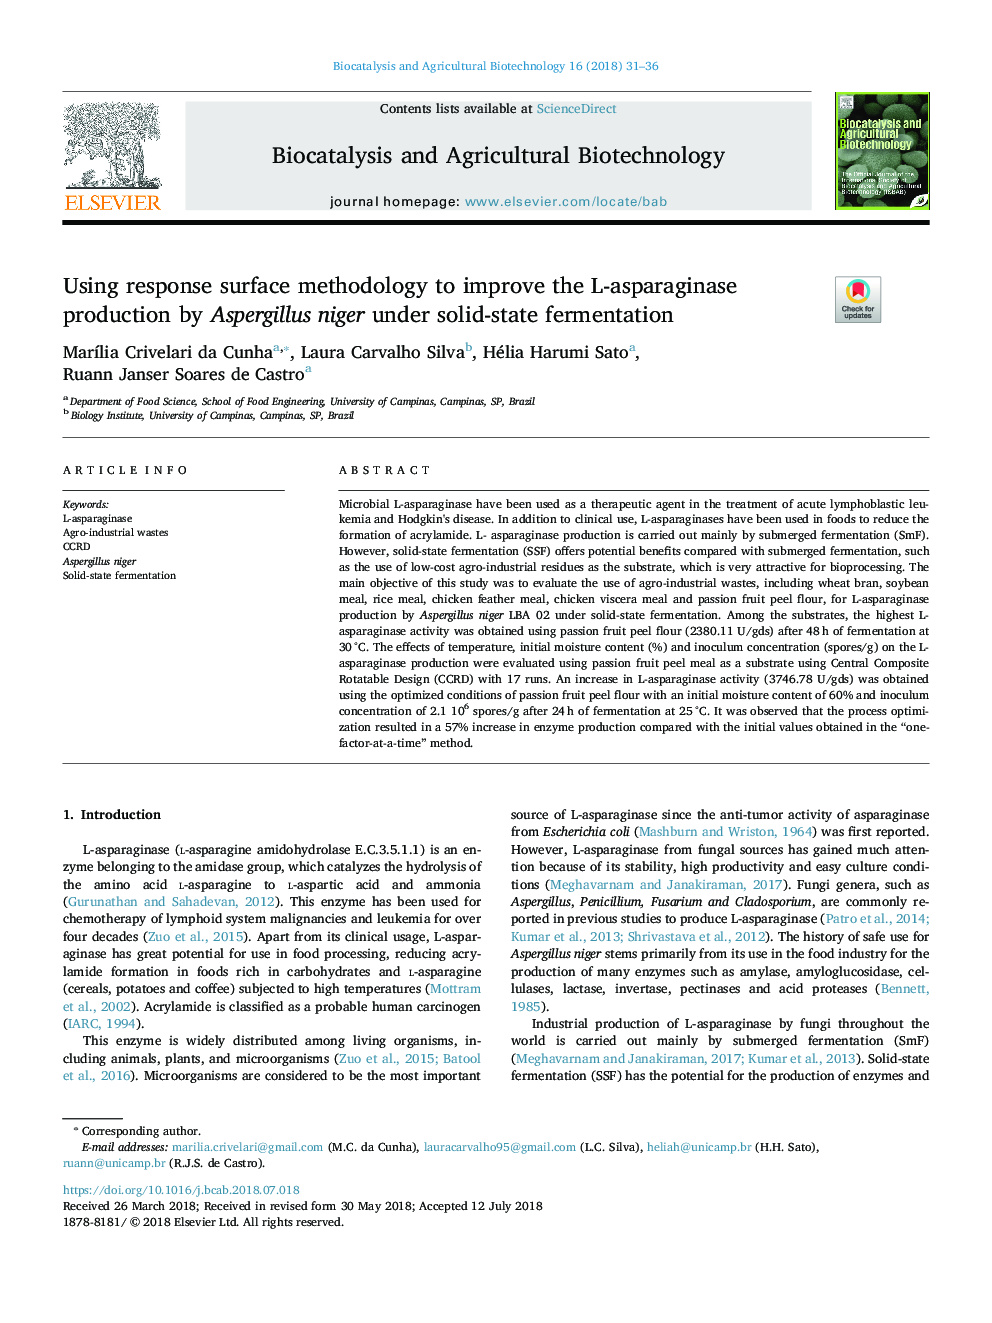 Using response surface methodology to improve the L-asparaginase production by Aspergillus niger under solid-state fermentation